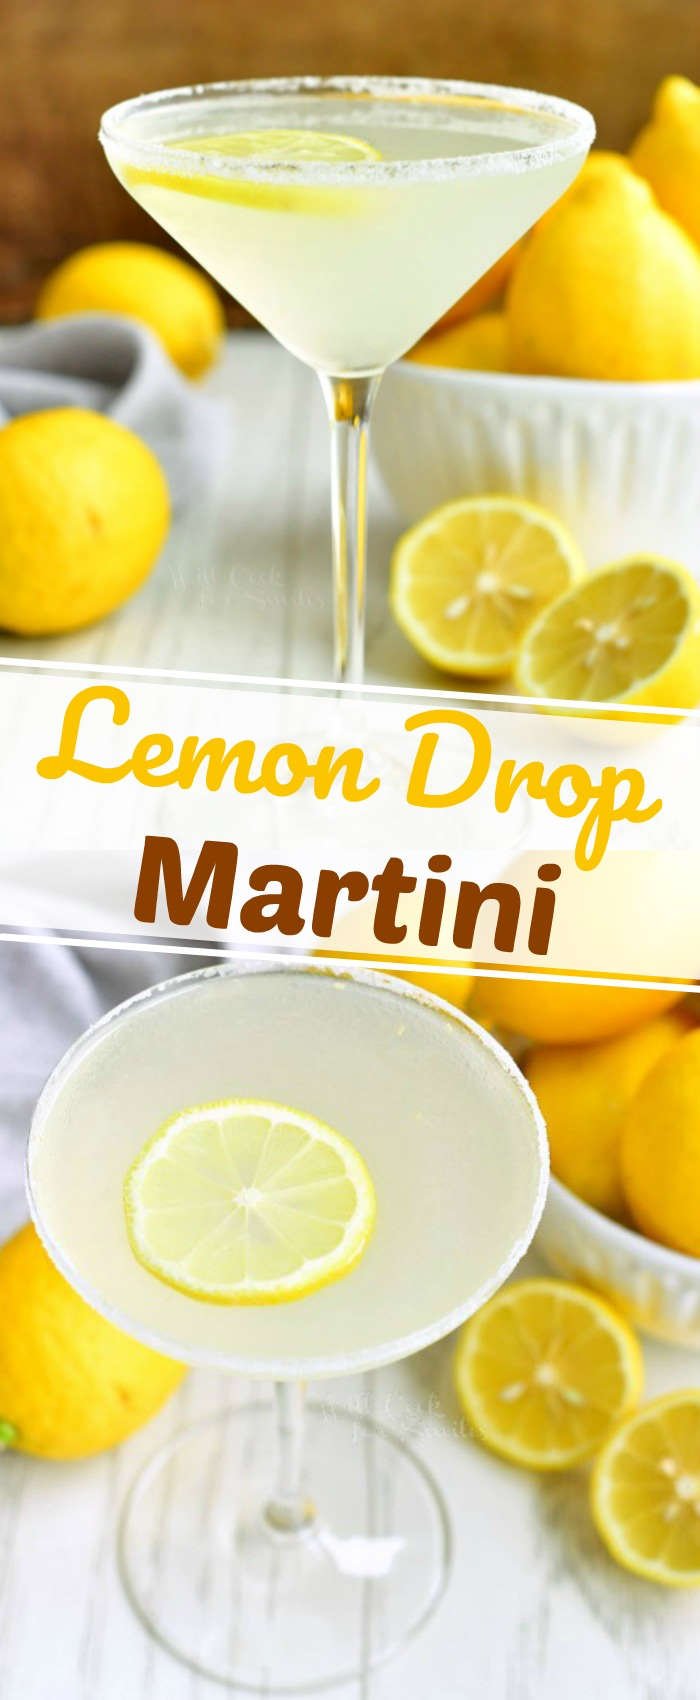 college of two images of lemon drop martini surrounded by lemons on top and top view of martini in a glass on the bottom